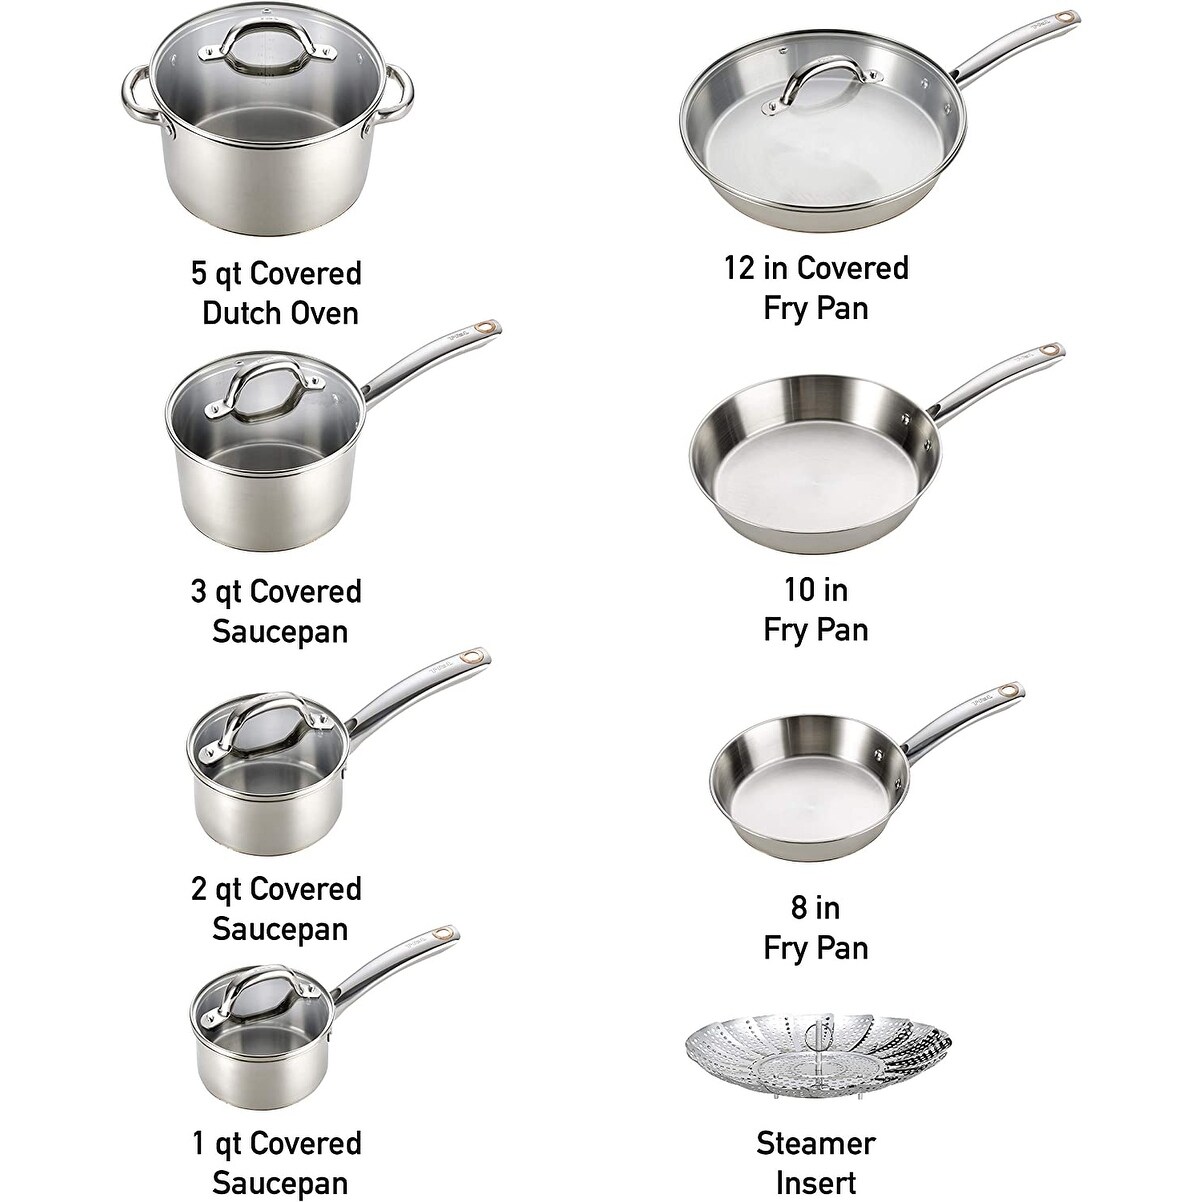 T-fal Ingenio Stainless Steel Cookware Set 13 Piece Induction Cookware,  Pots and Pans, Oven, Broil, Dishwasher Safe Silver